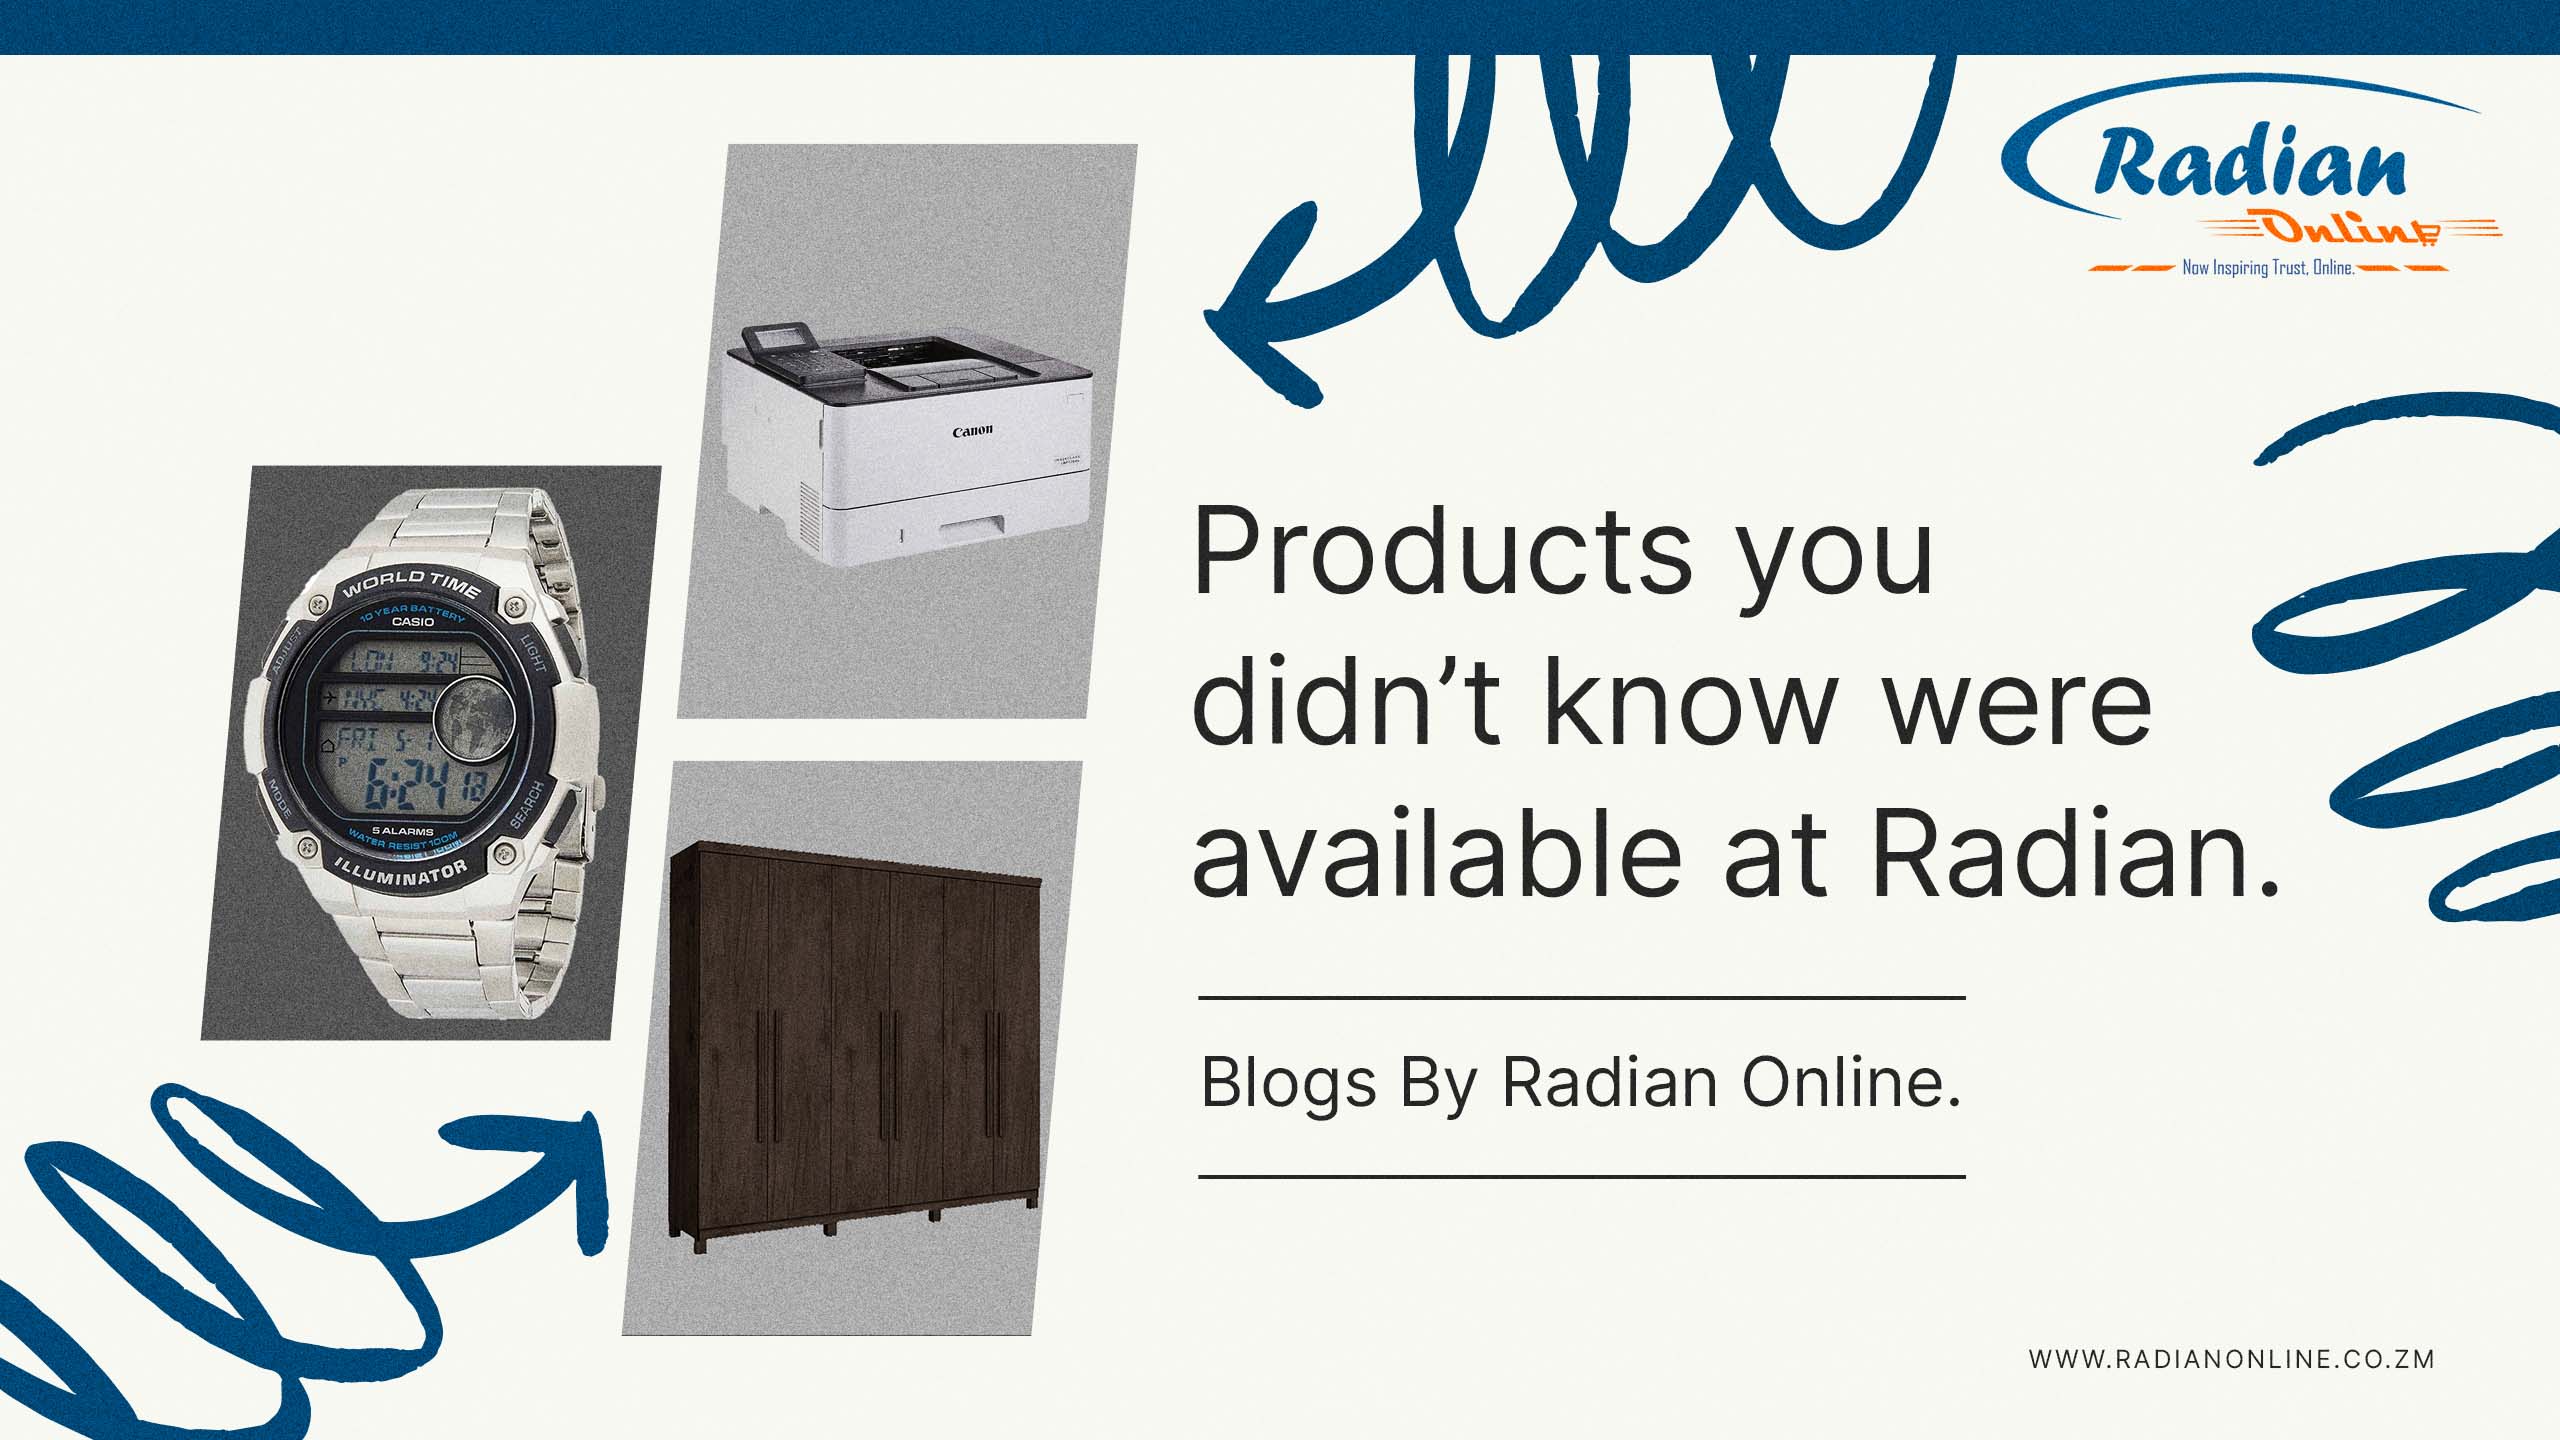 5 PRODUCTS YOU DIDN’T KNOW WERE AVAILABLE ON RADIAN ONLINE